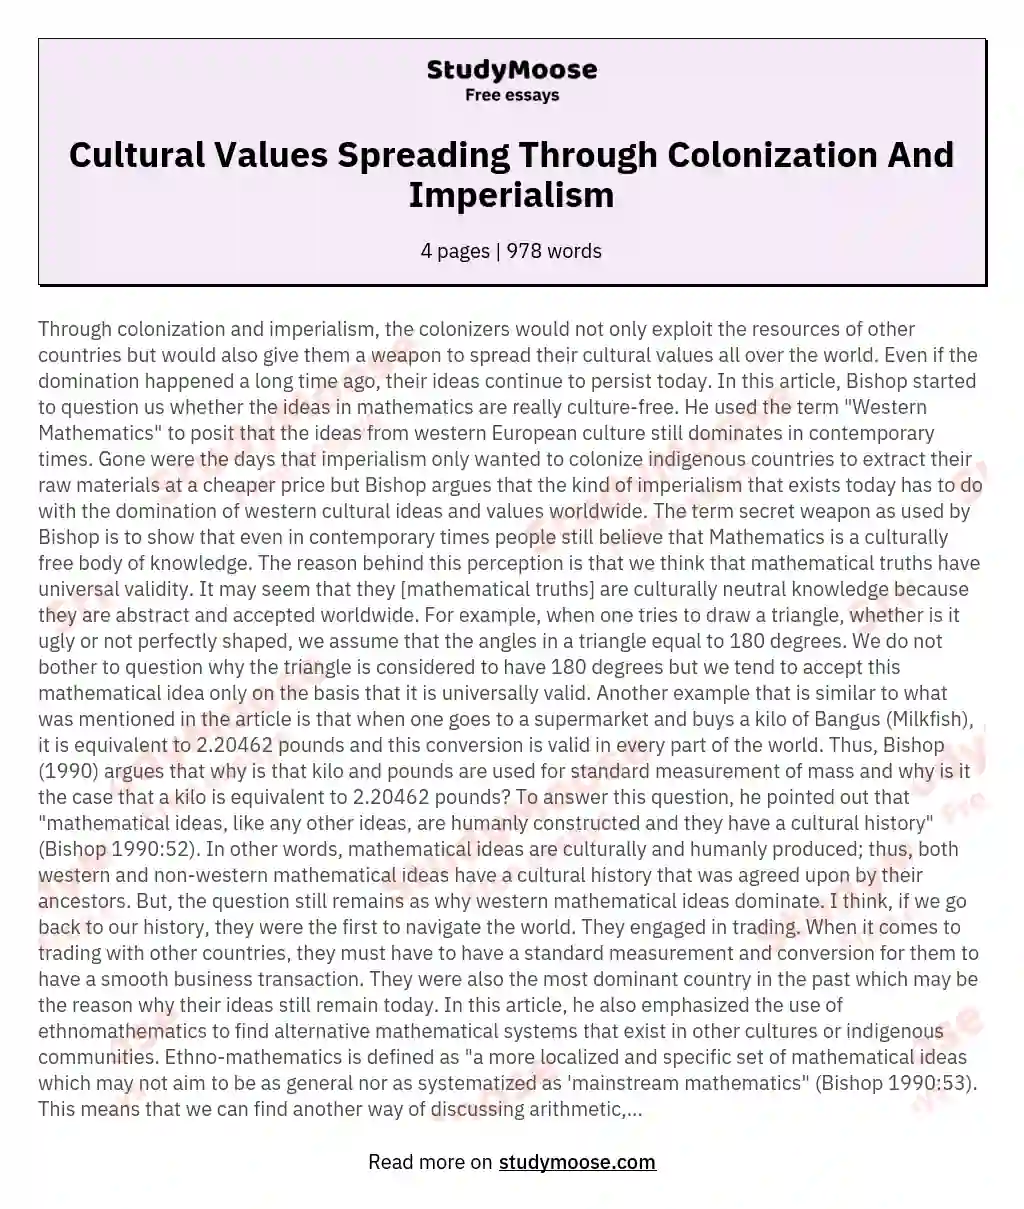 Cultural Values Spreading Through Colonization And Imperialism essay